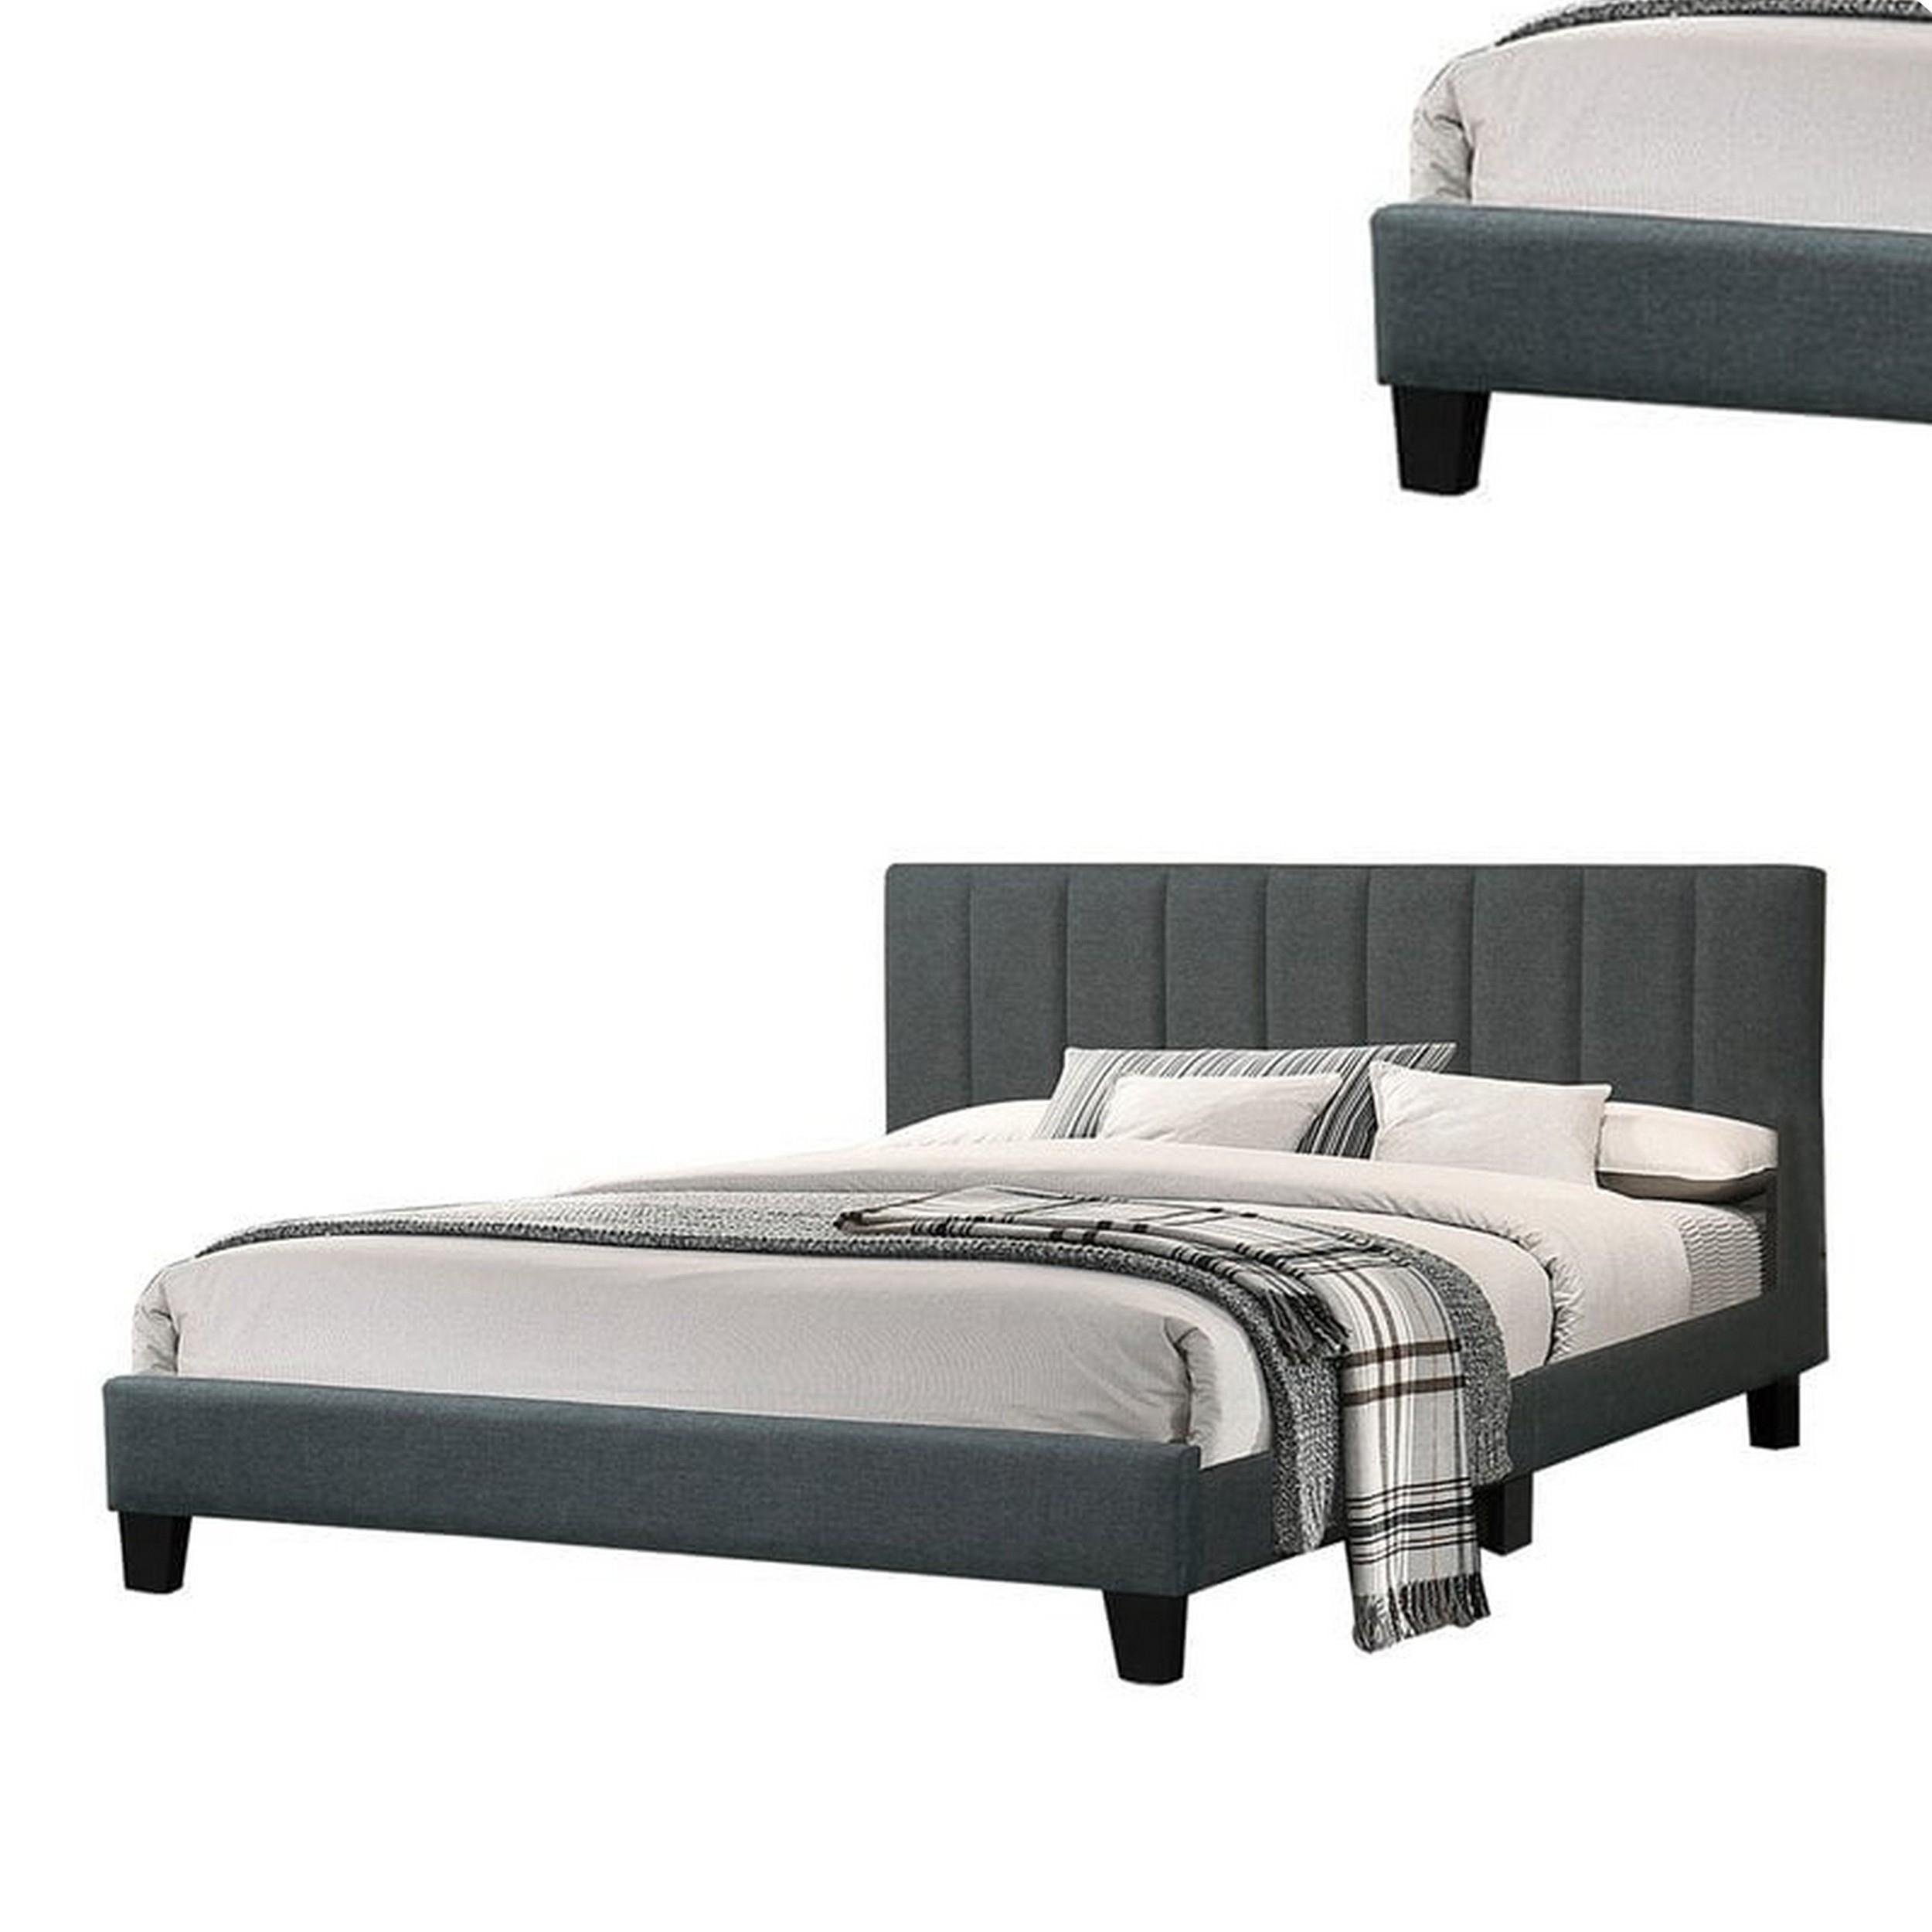 Eve Platform Queen Size Bed, Vertical Channel Tufting, Charcoal Upholstery- Saltoro Sherpi